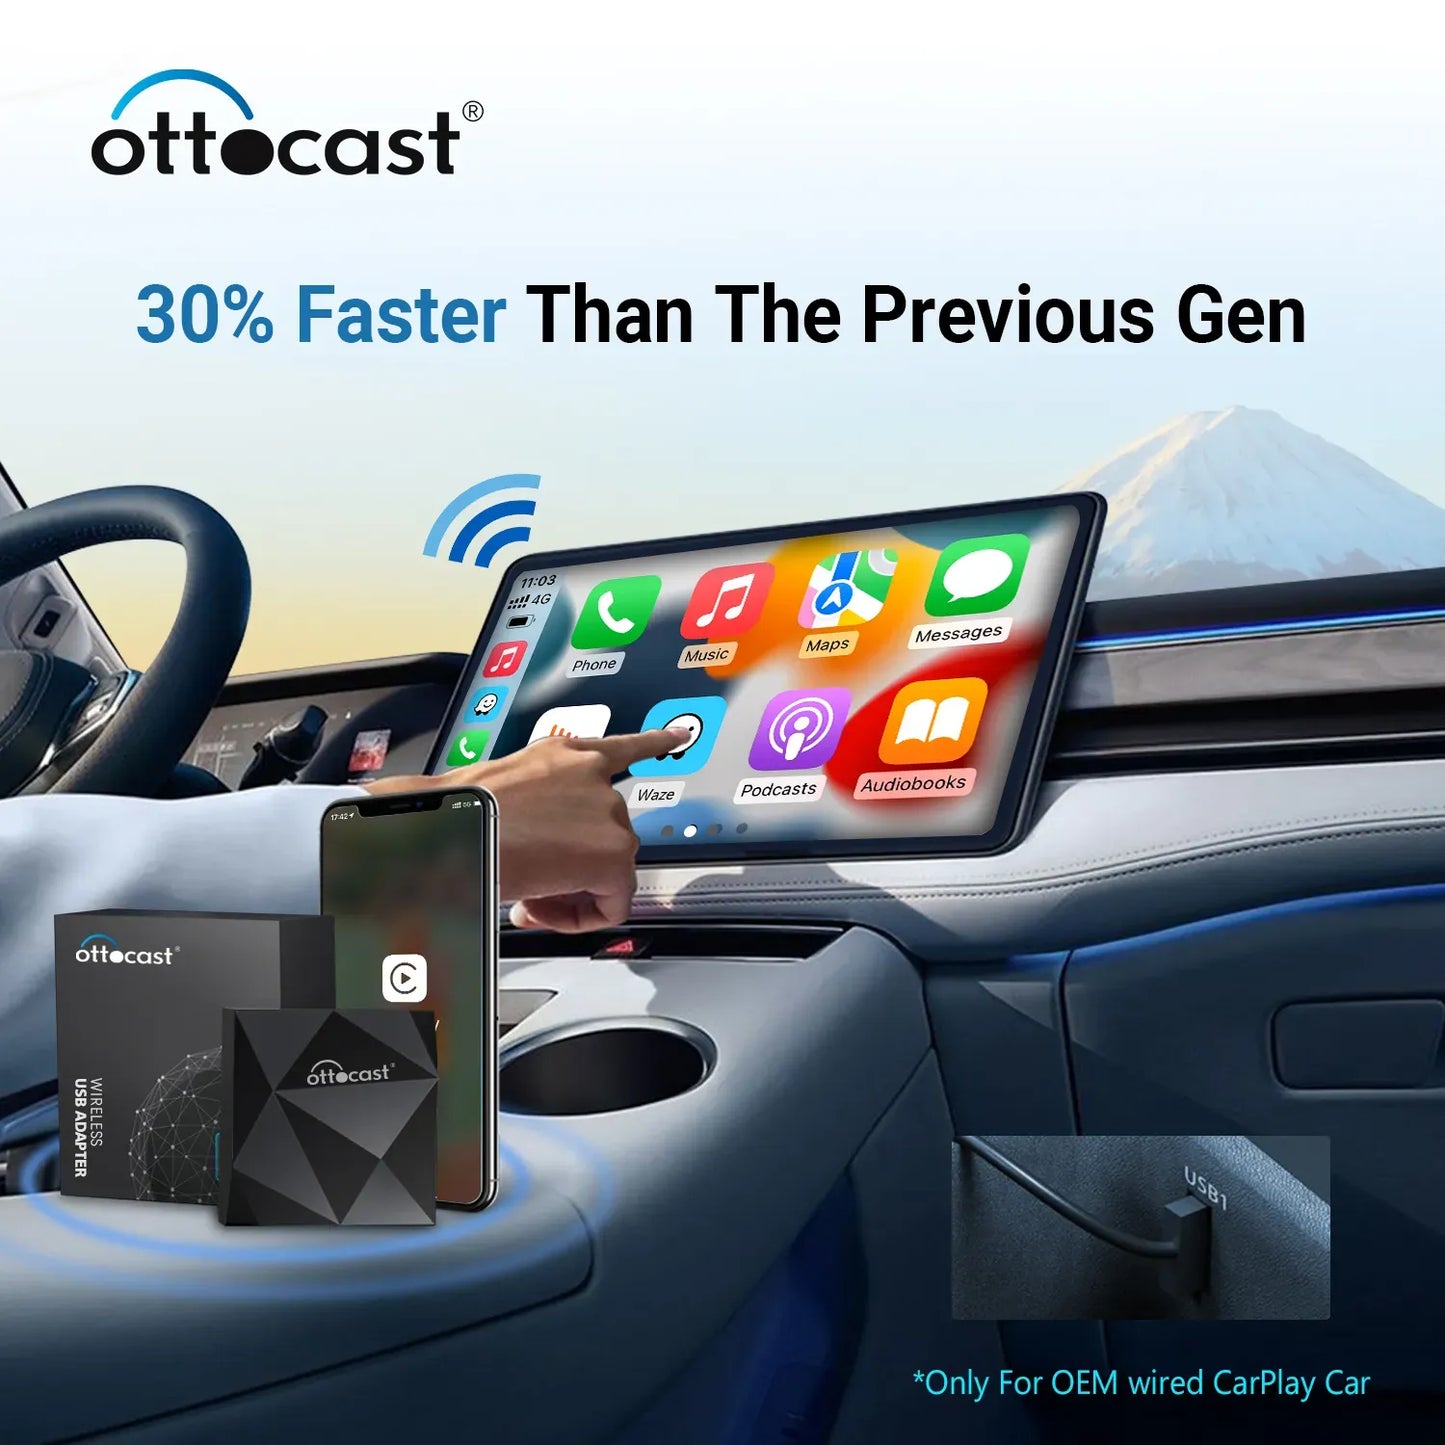 OTTOCAST ™ A2 Pro Android Auto Adapte